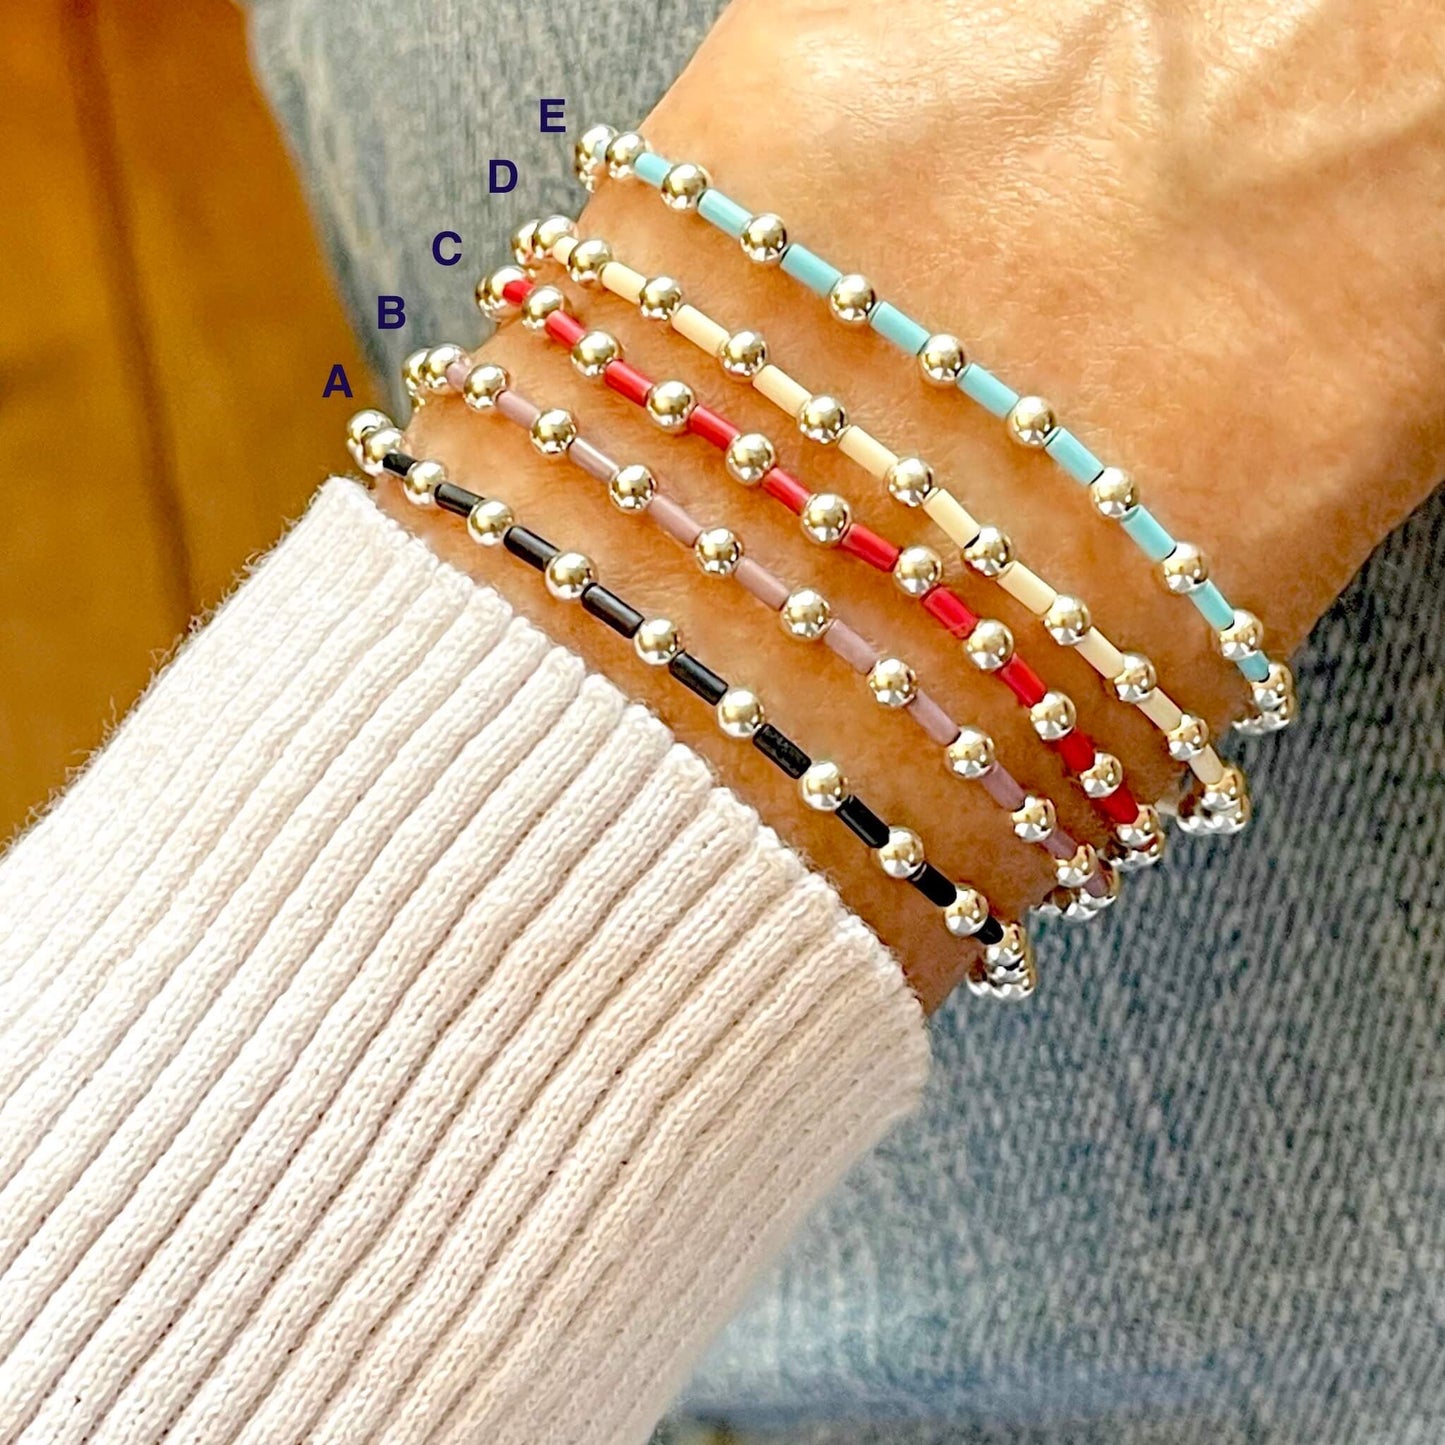 Women's beaded bracelets with seed beads in slate, purple, red, ivory, and blue, alternating with silver 3mm ball beads. Stretchy.